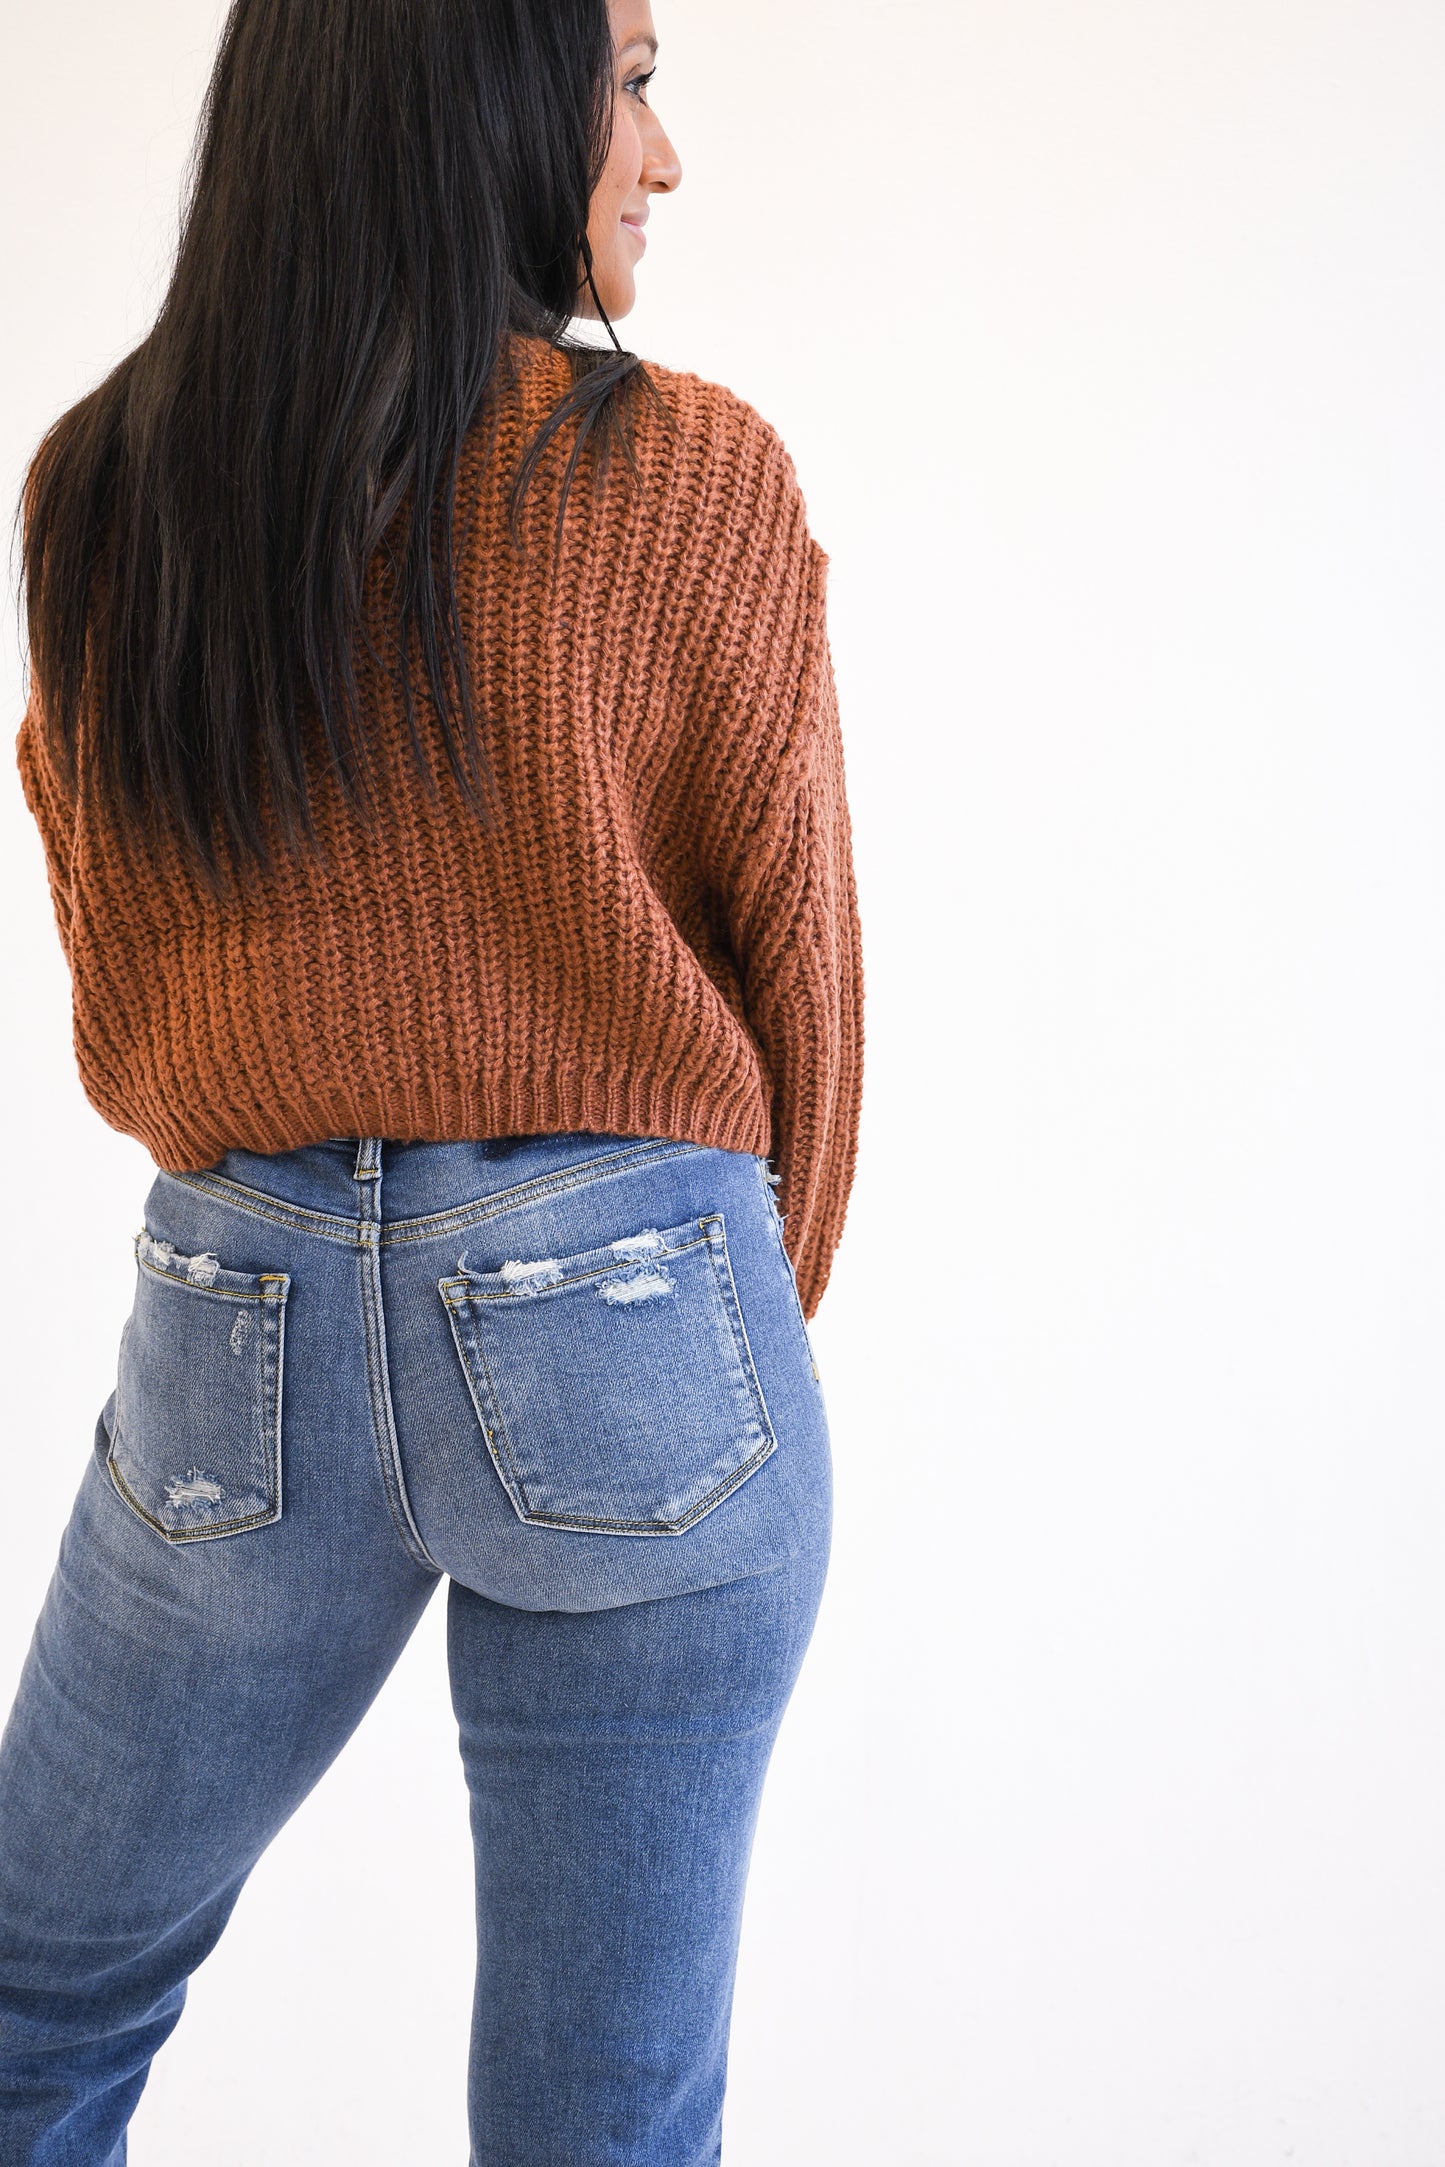 Autumn Brown Crop Sweater (Size Small),Tops,SWEATER, SWEATERS- DEFIANT